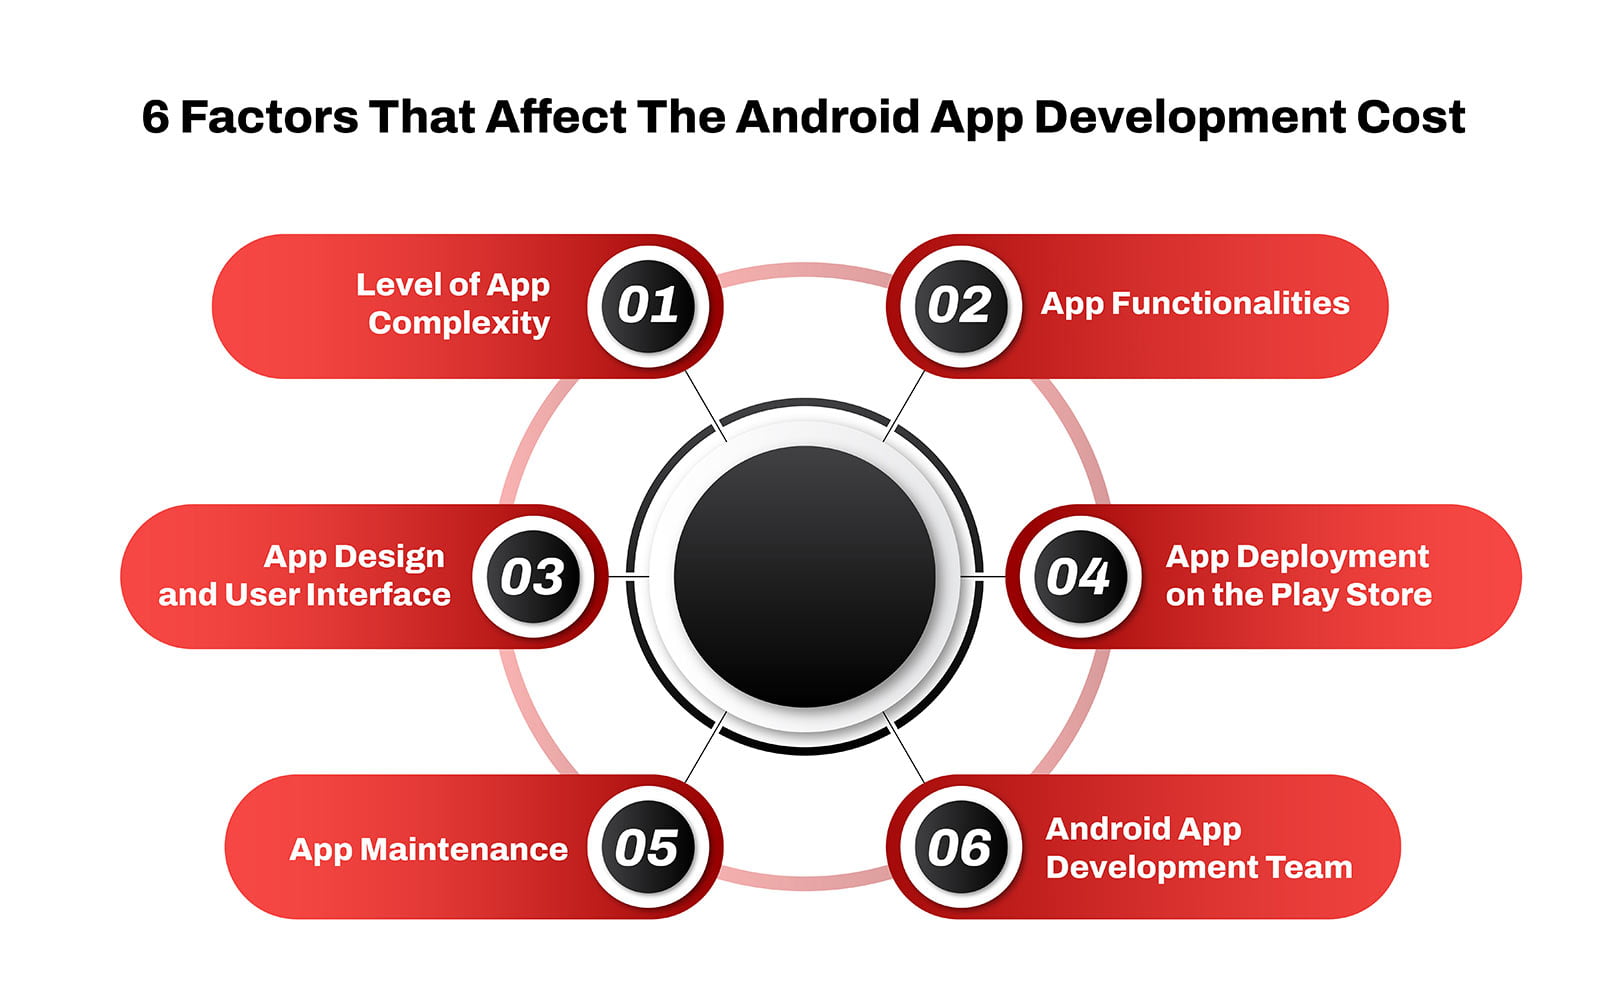 6 Factors Contributing to Android App Development Cost